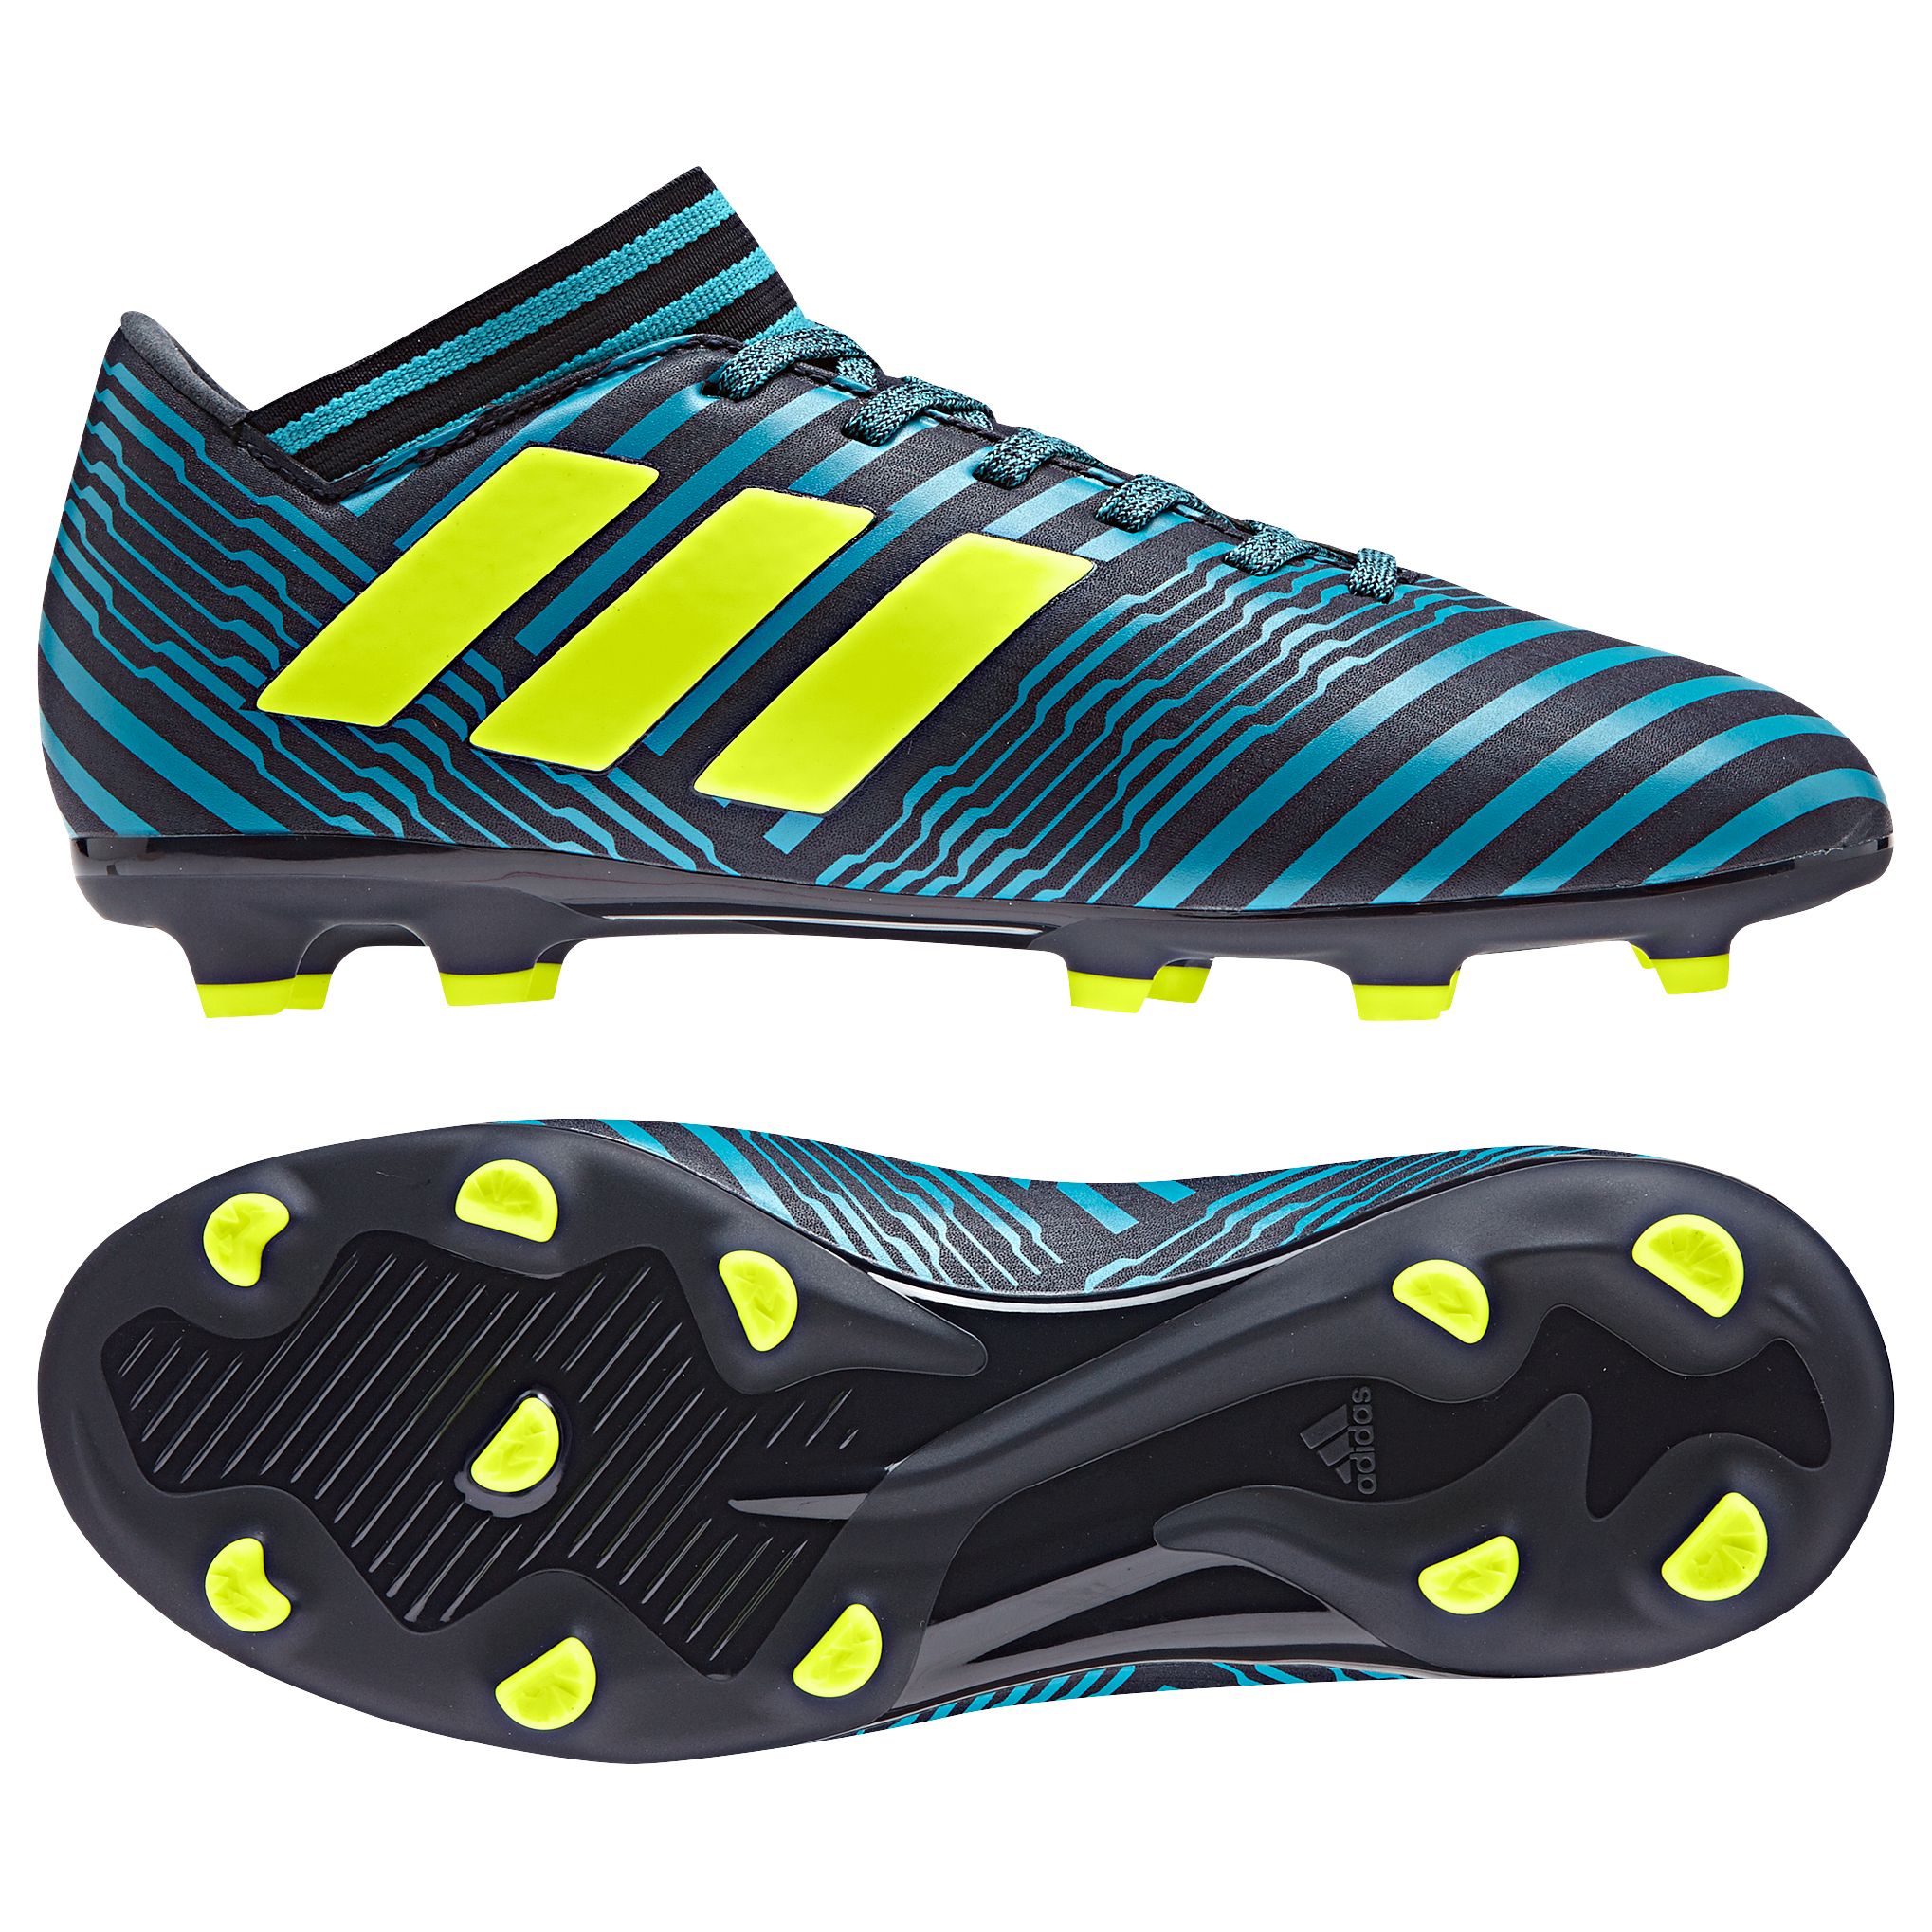 adidas blue and black football boots